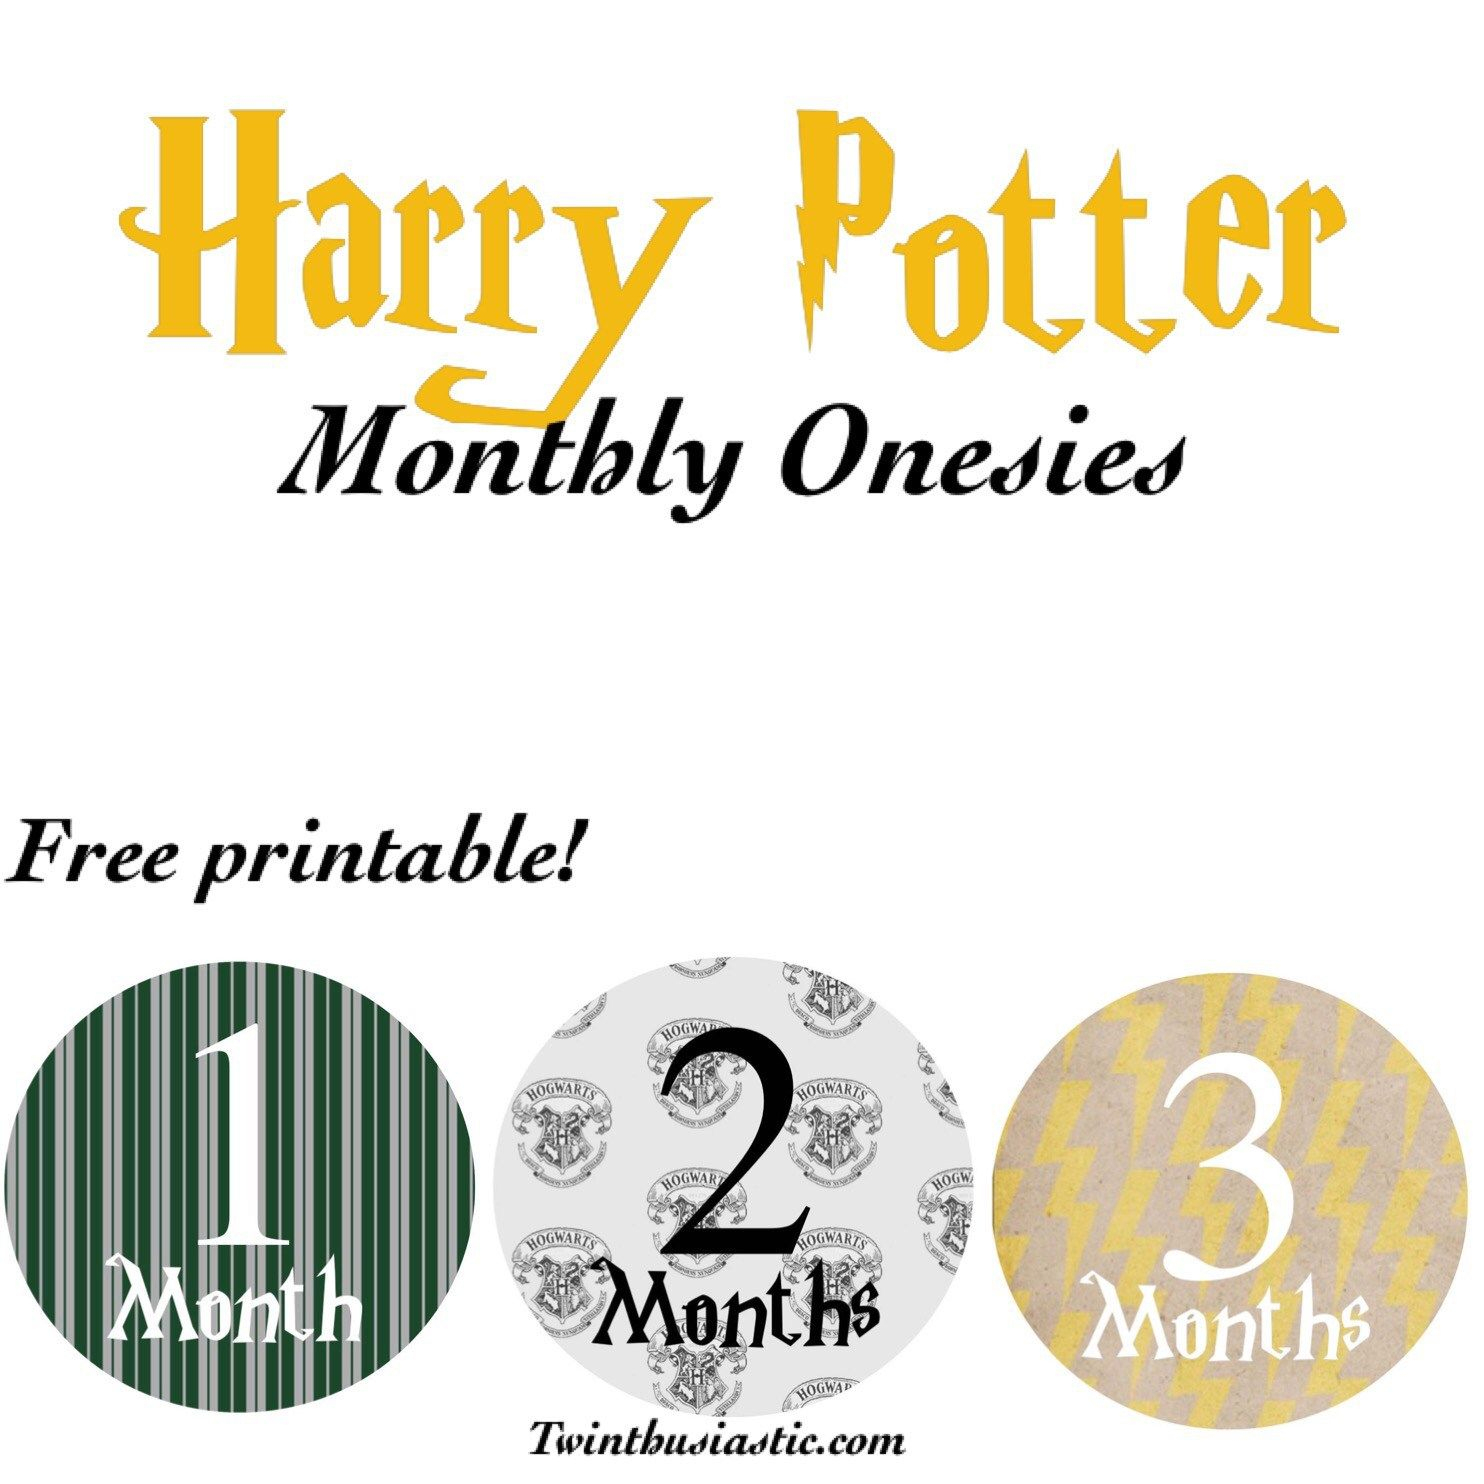 Free Printable: Harry Potter-Themed Monthly Onesies | Twin Mom Stuff - Free Printable Onesies